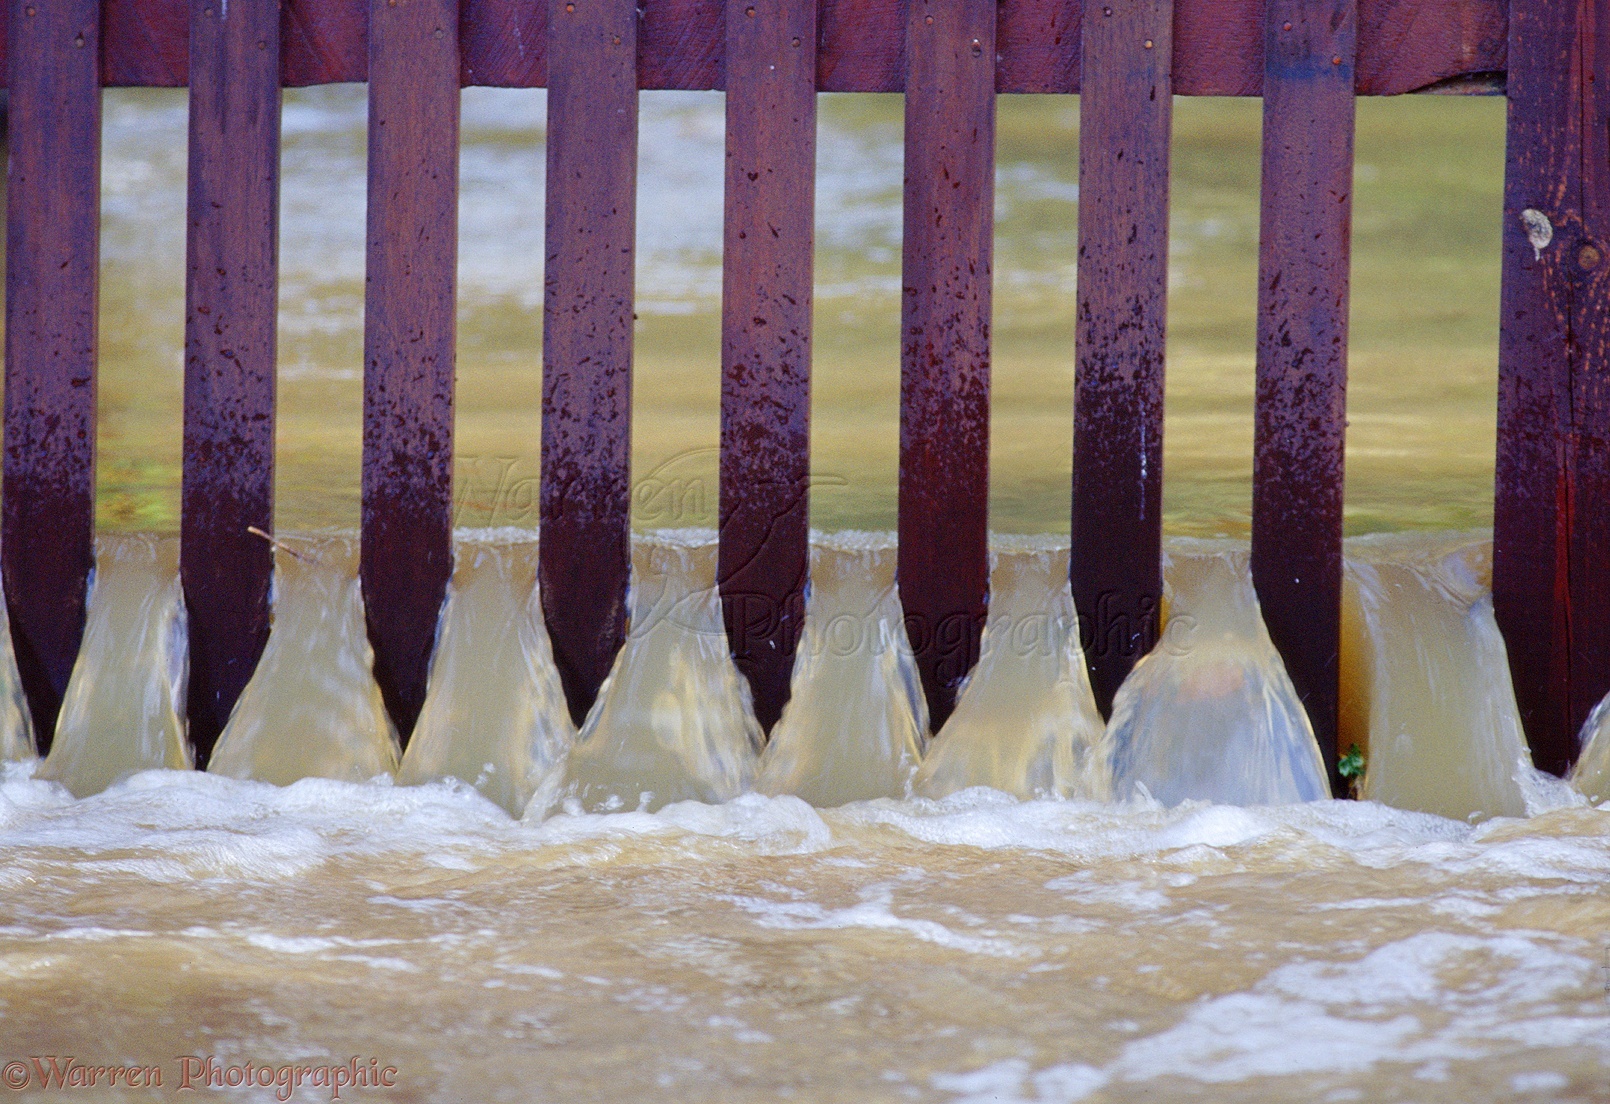 01785-Flood-water-pouring-through-a-fence.jpg